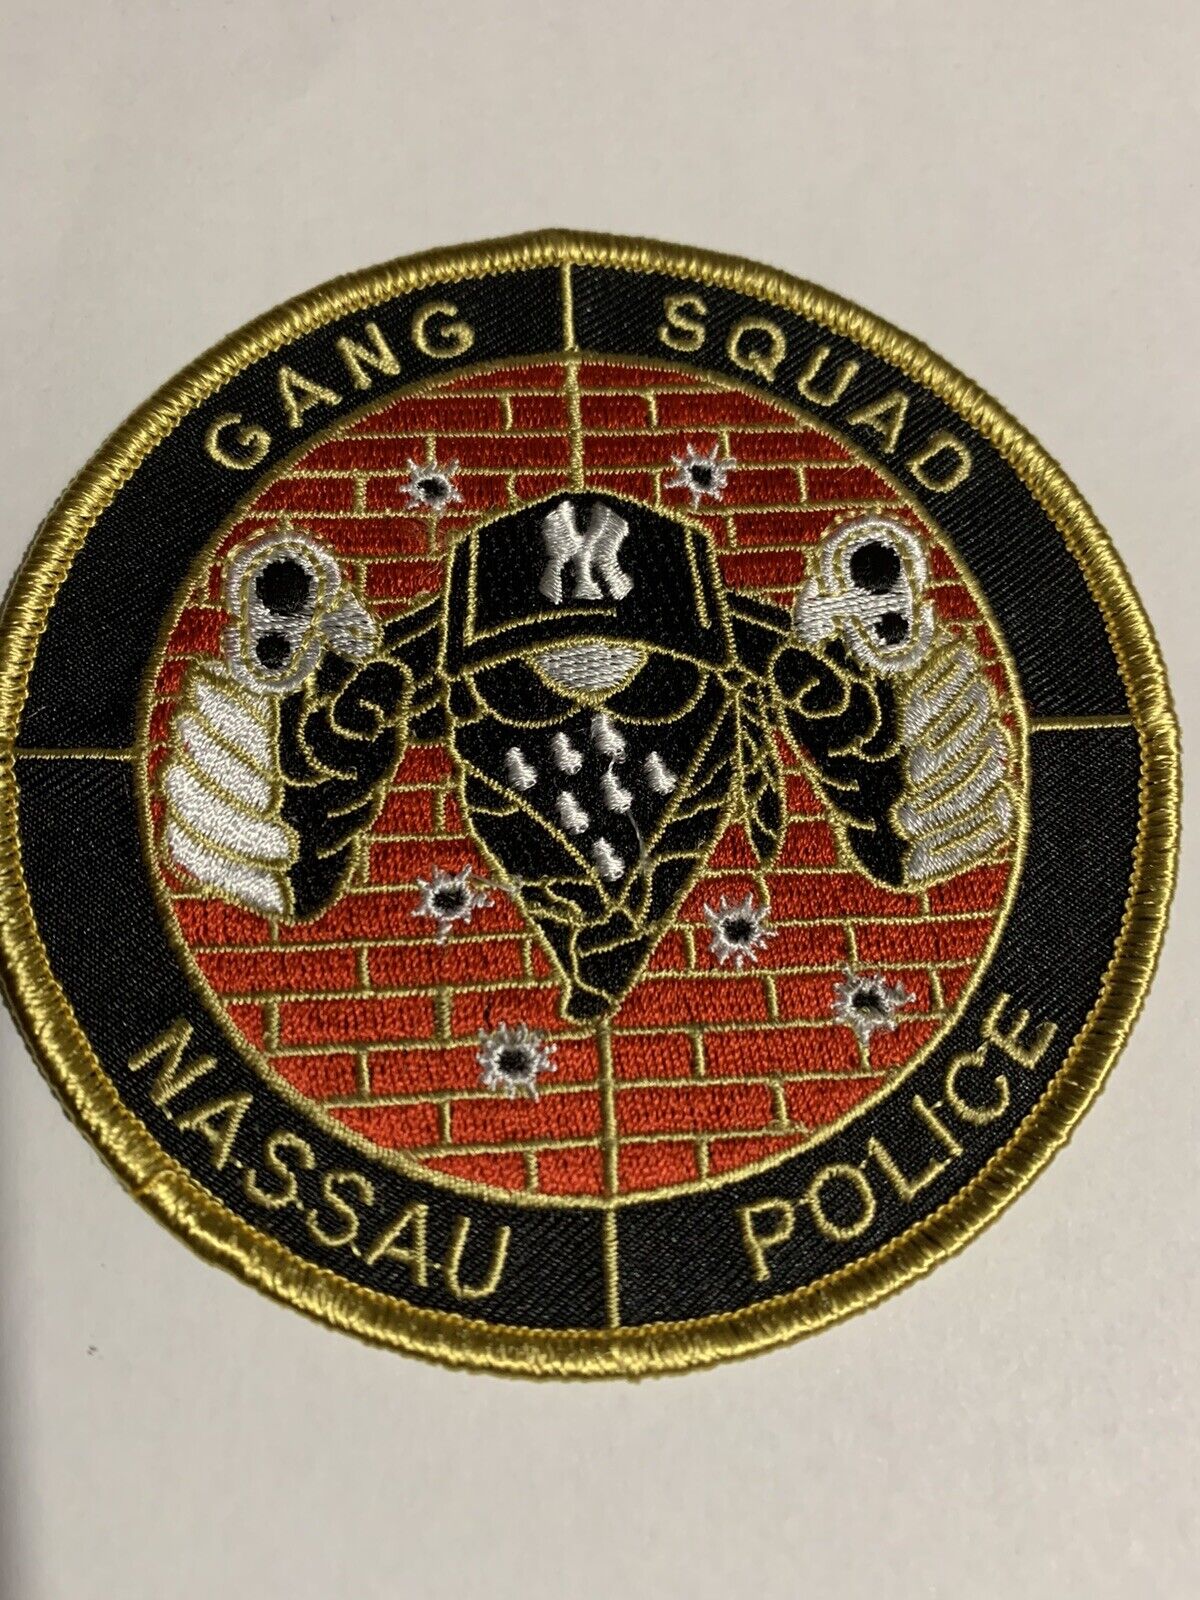 NASSAU COUNTY POLICE DEPT NCPD GANG SQUAD CRIME LONG ISLAND PATCH NEW YORK